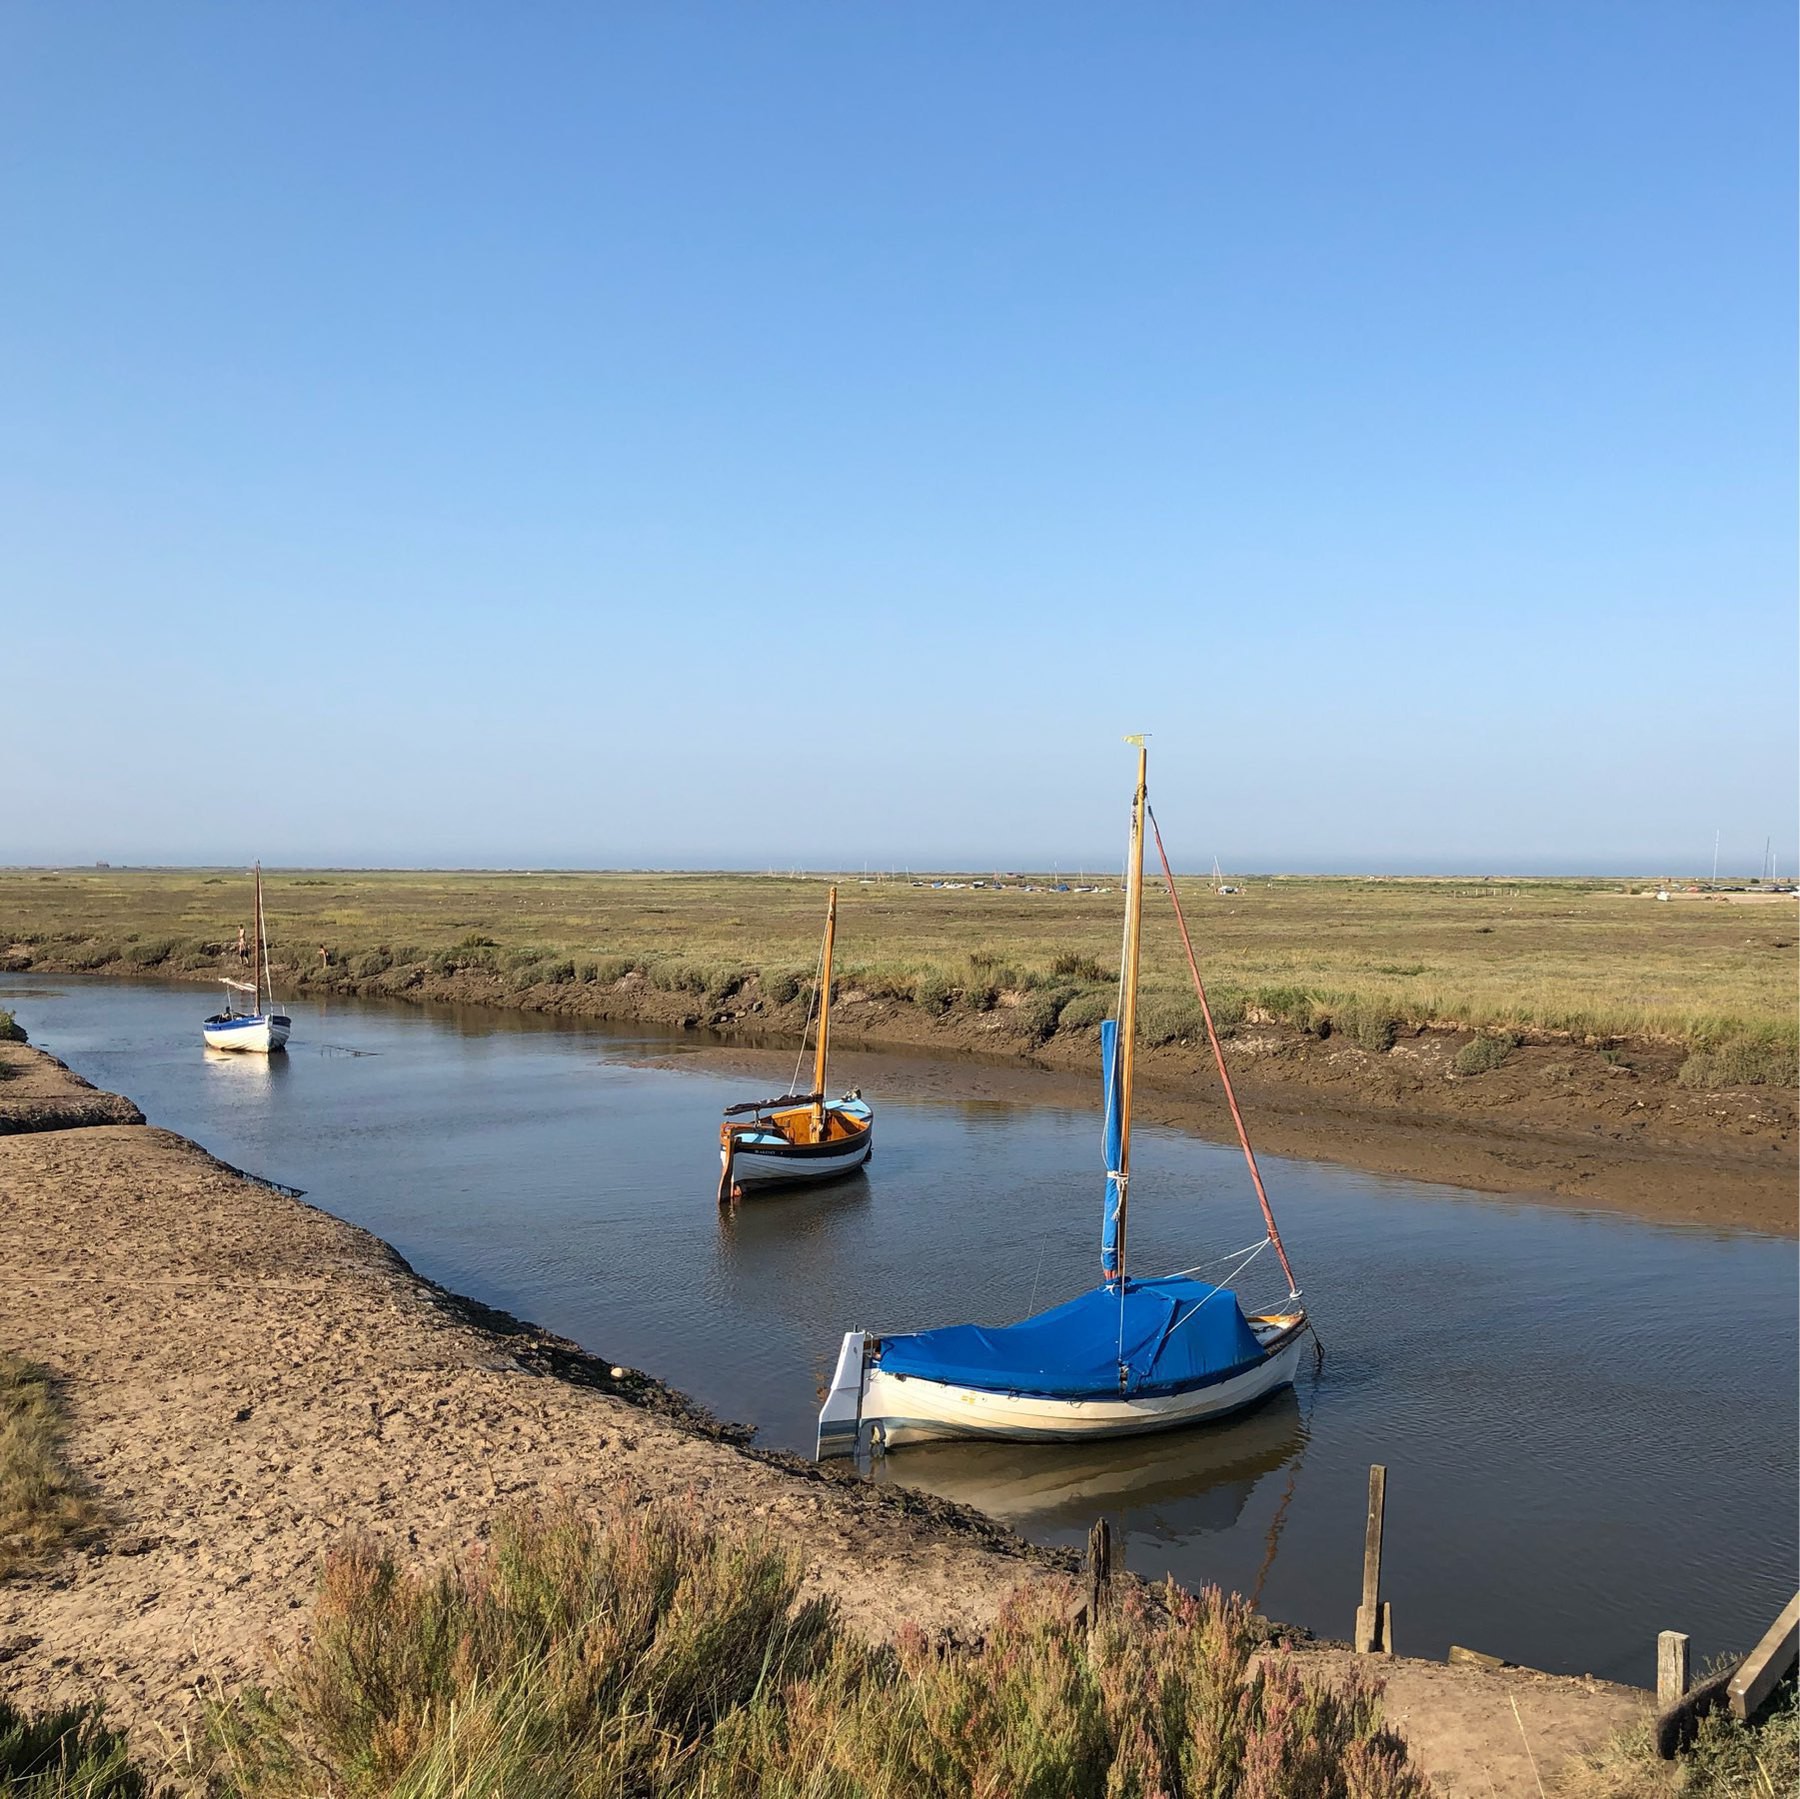 Tide is low and you can see the fields with the boats parked waiting to be taken away and sailed.